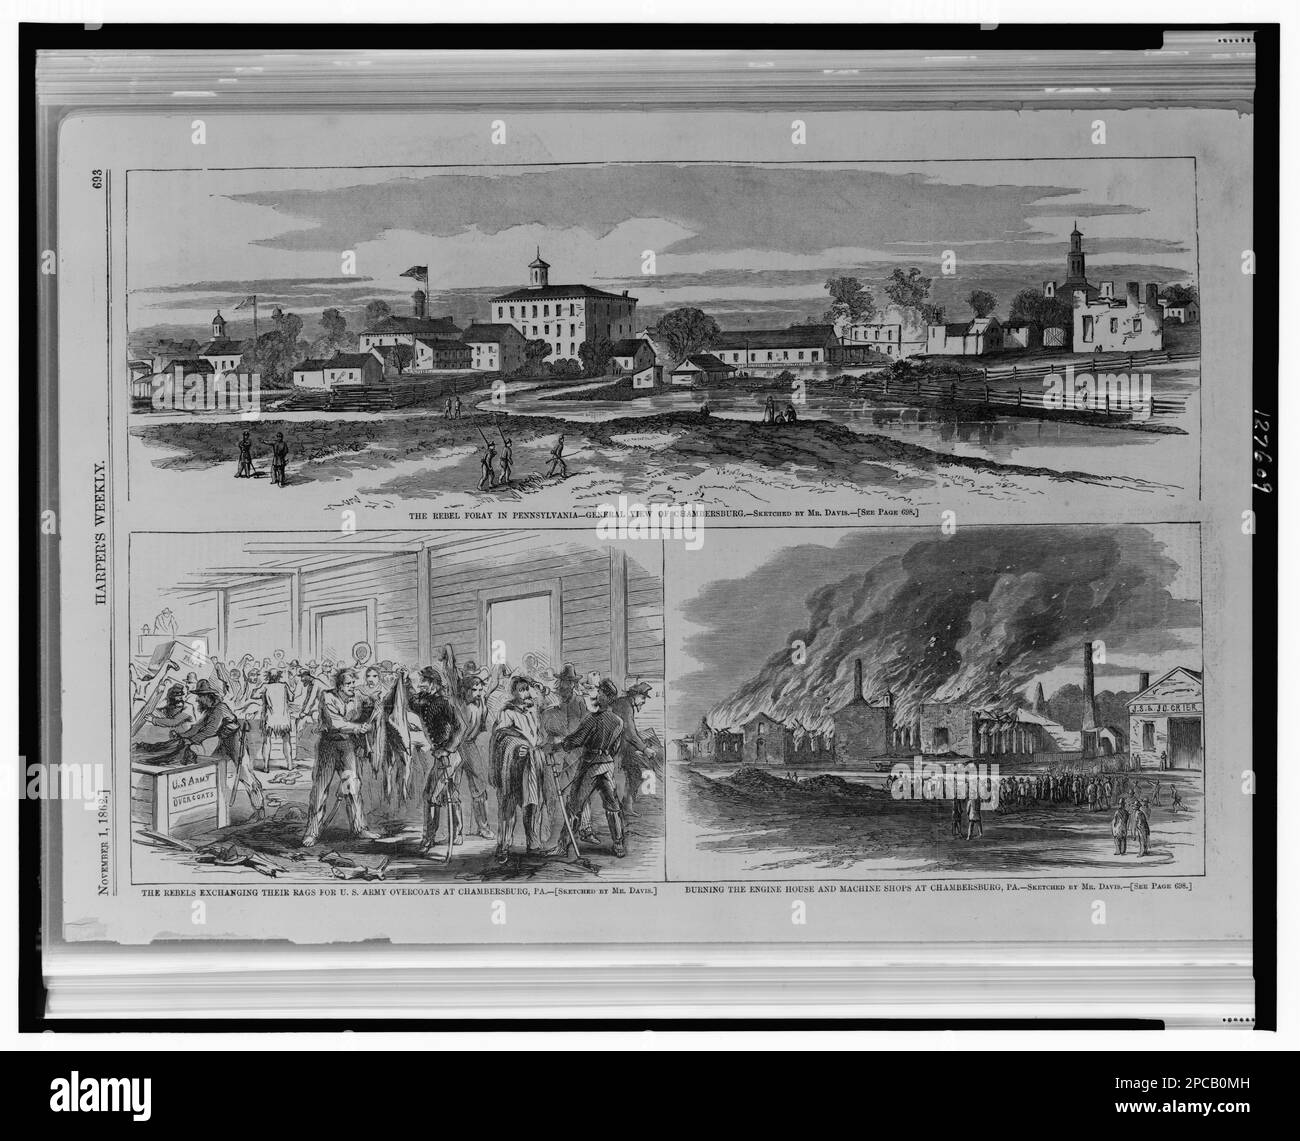 The Rebel foray in Pennsylvania - General view of Chambersburg ; The Rebels exchanging their rags for overcoats at Chambersburg, Pa. ; Burning the engine house and machine shops at Chambersburg, Pa. / / sketched by Mr. Davis.. Illus. in: Harper's weekly, v. 6, no. 305 (1862 Nov. 1), p. 693, DCRM(G) example 1D2.4 - material (multiple works) without a collective title. Fires, Pennsylvania, Chambersburg, 1860-1870, Military personnel, Confederate, Pennsylvania, Chambersburg, 1860-1870, United States, History, Civil War, 1861-1865, Destruction & pillage, Confederate. Stock Photo